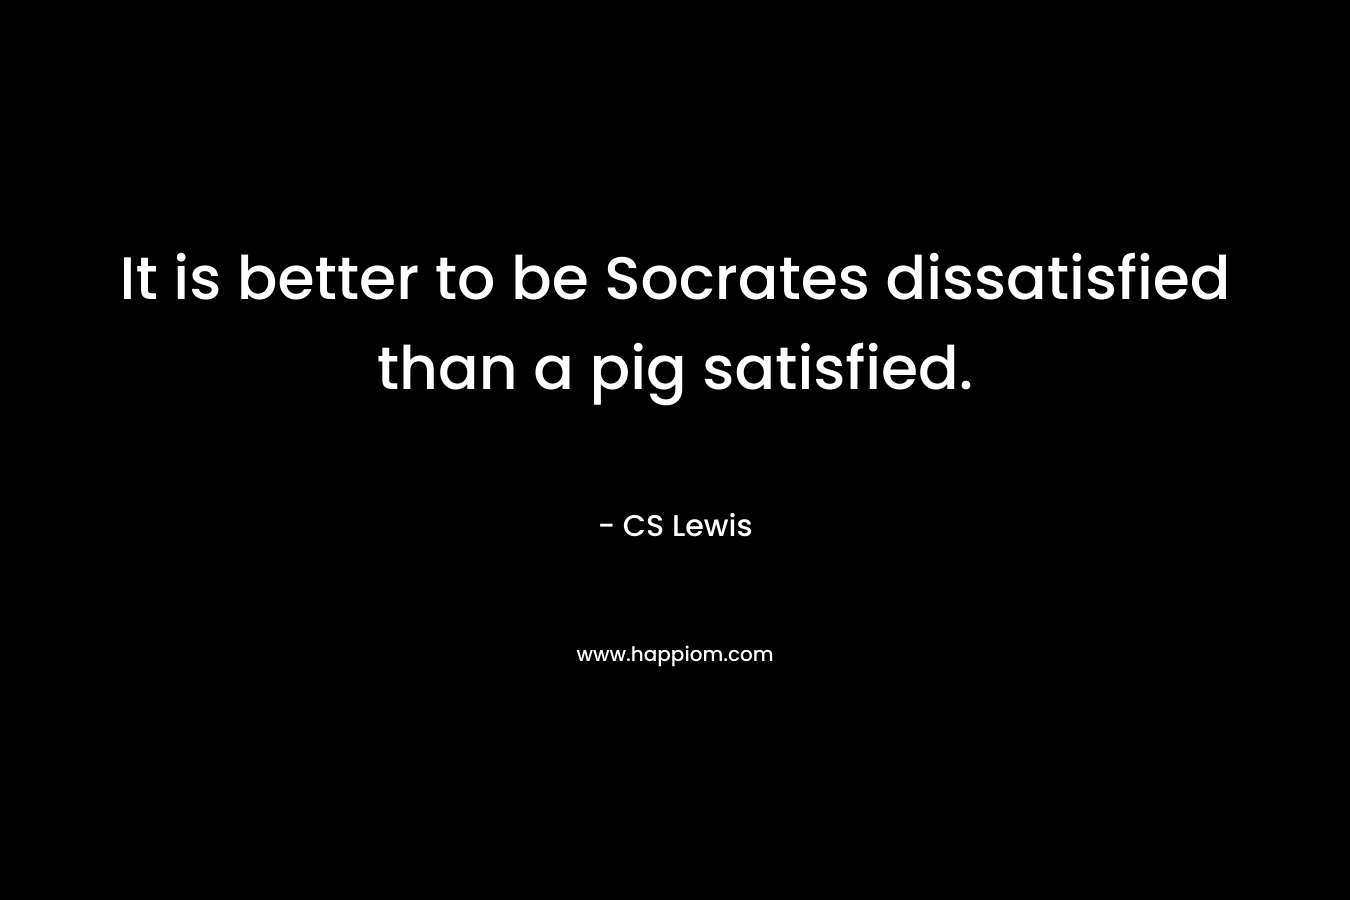 It is better to be Socrates dissatisfied than a pig satisfied.